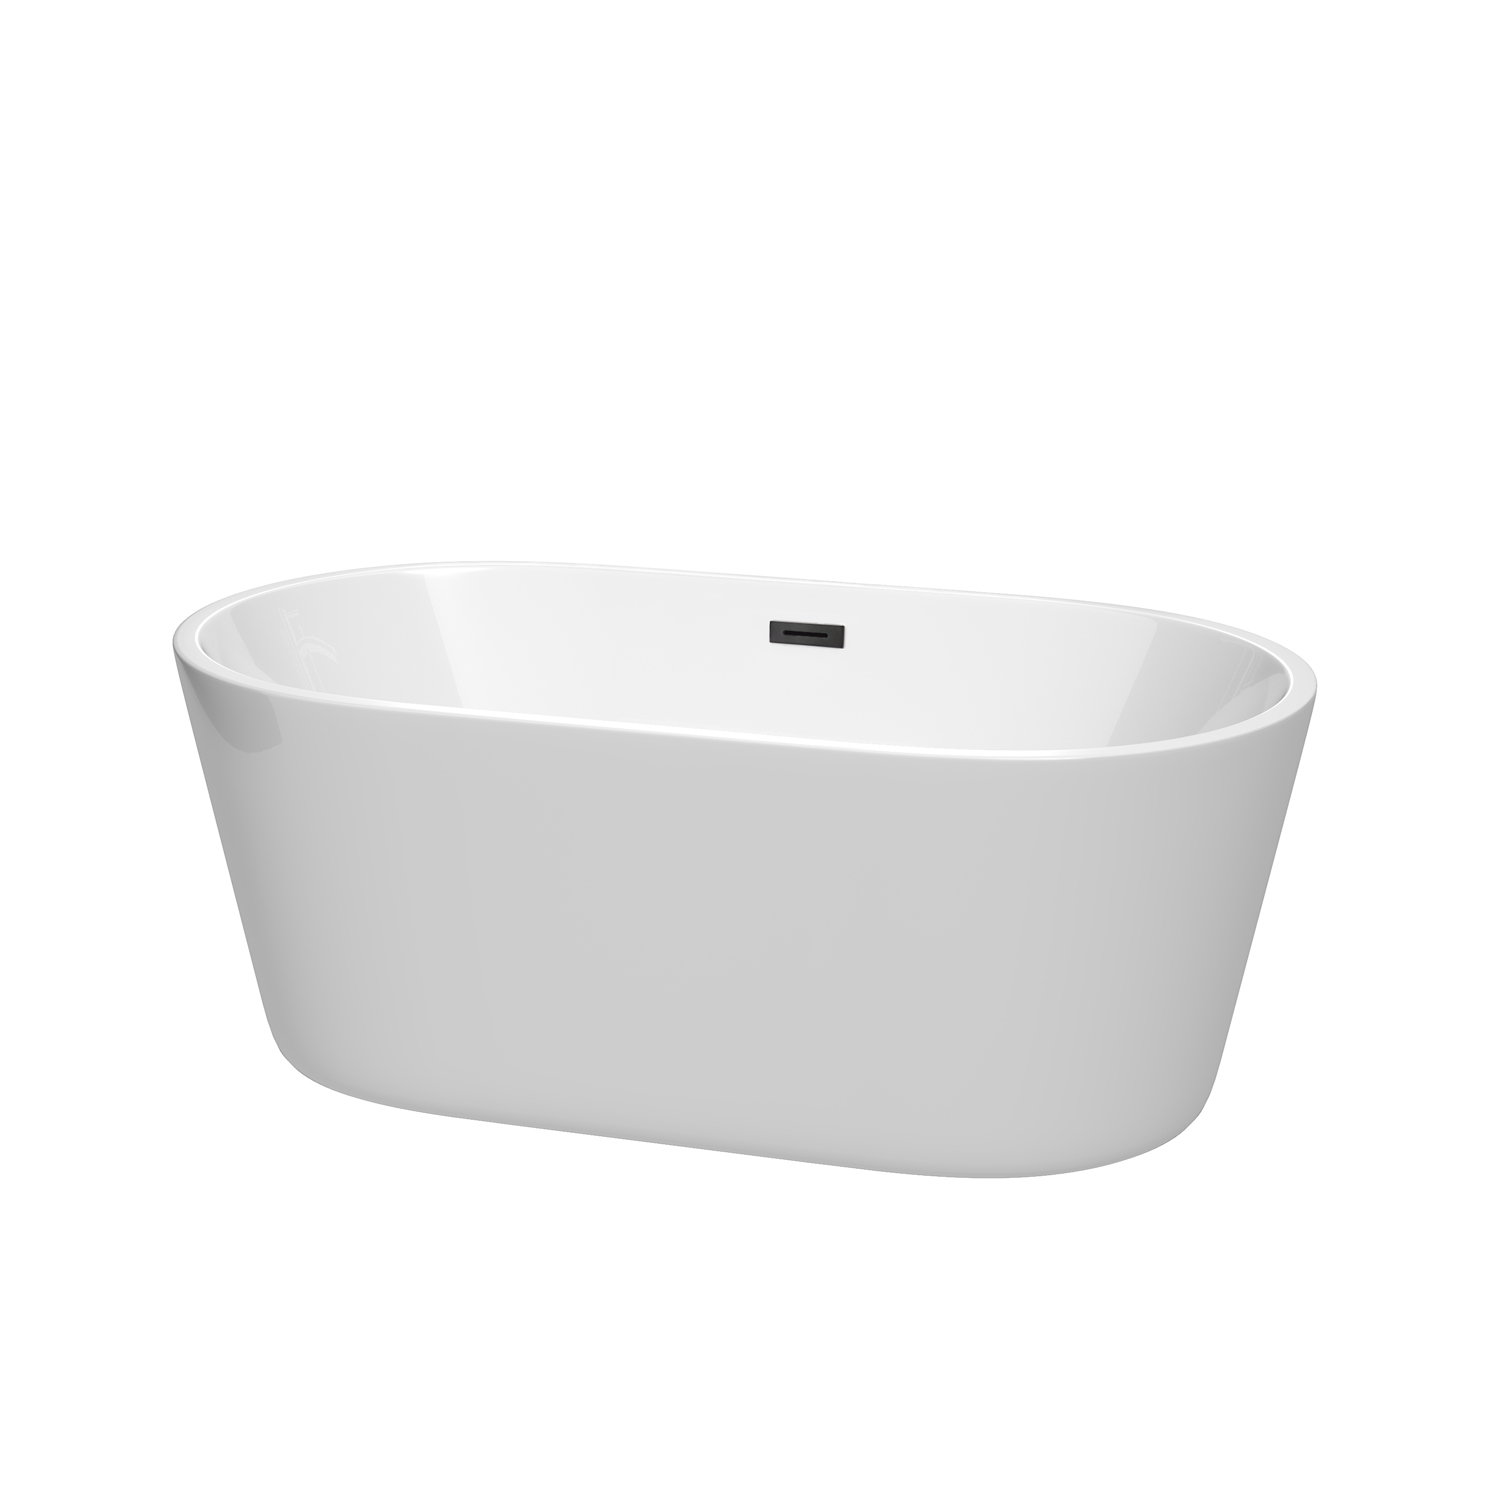 60" Freestanding Bathtub in White Finish with Matte Black Pop-up Drain and Overflow Trim